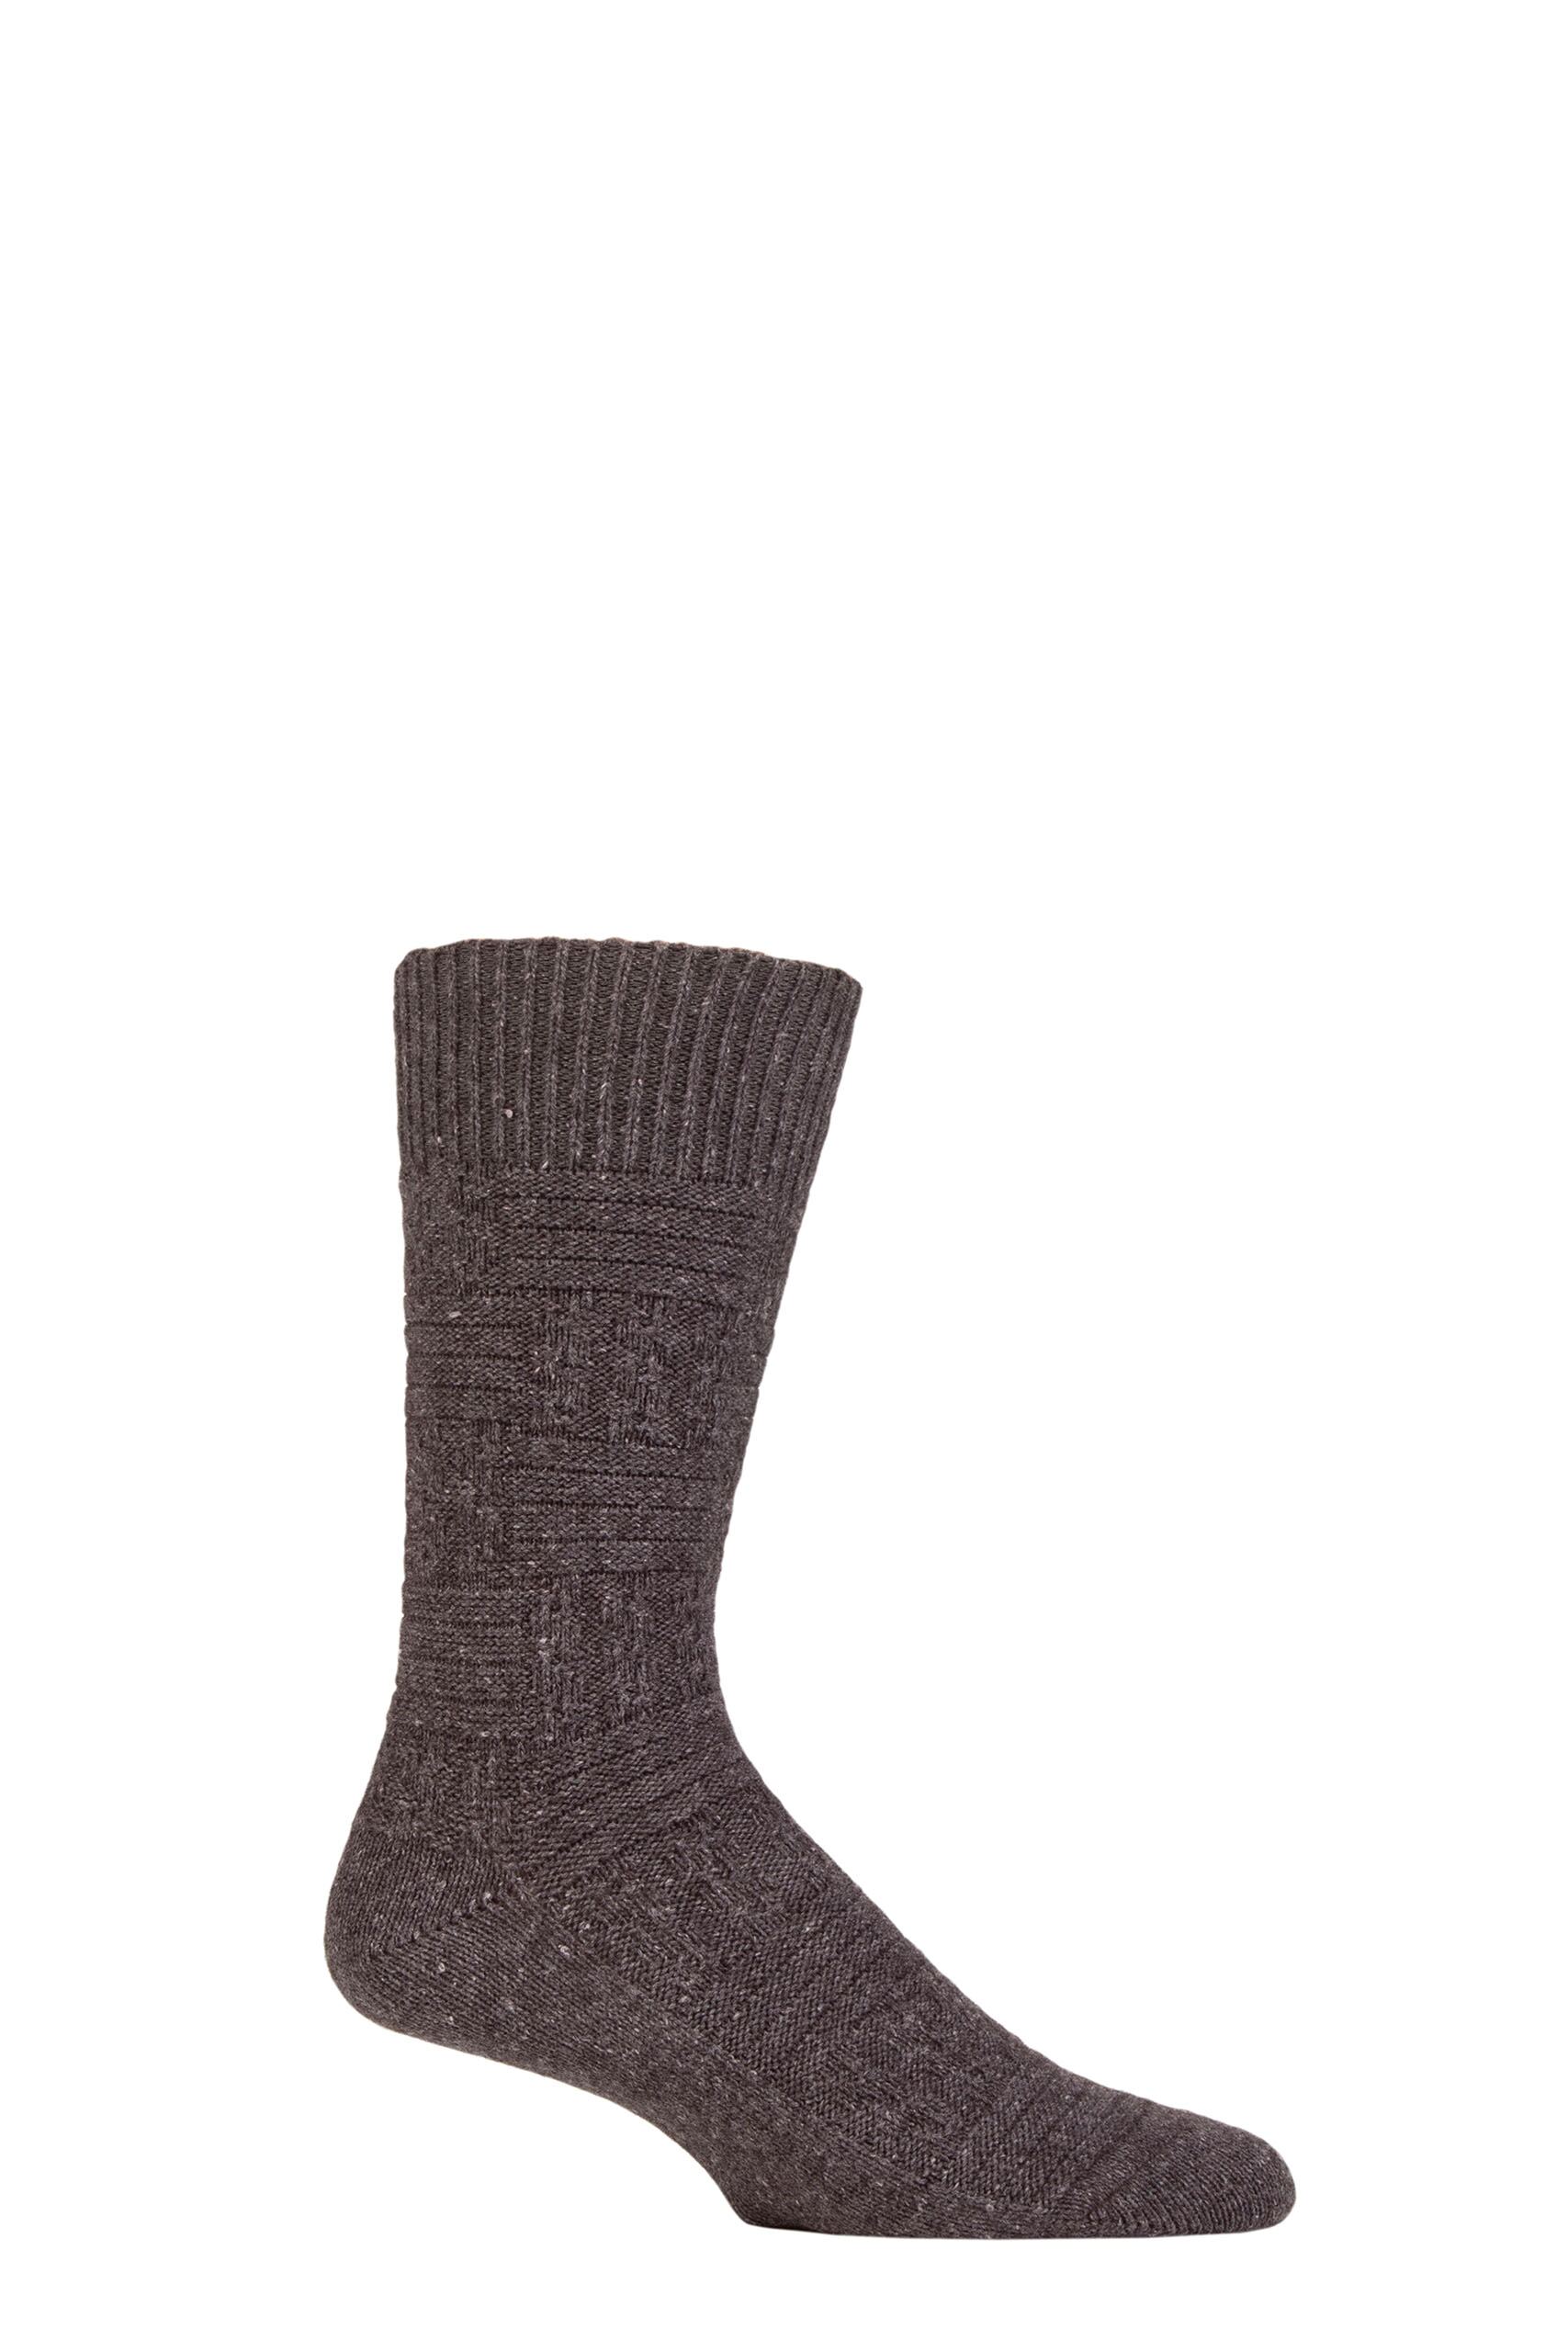 Mens 1 Pair Burlington Structured Wool and Cotton Boot Socks Brown 6.5-11 Mens